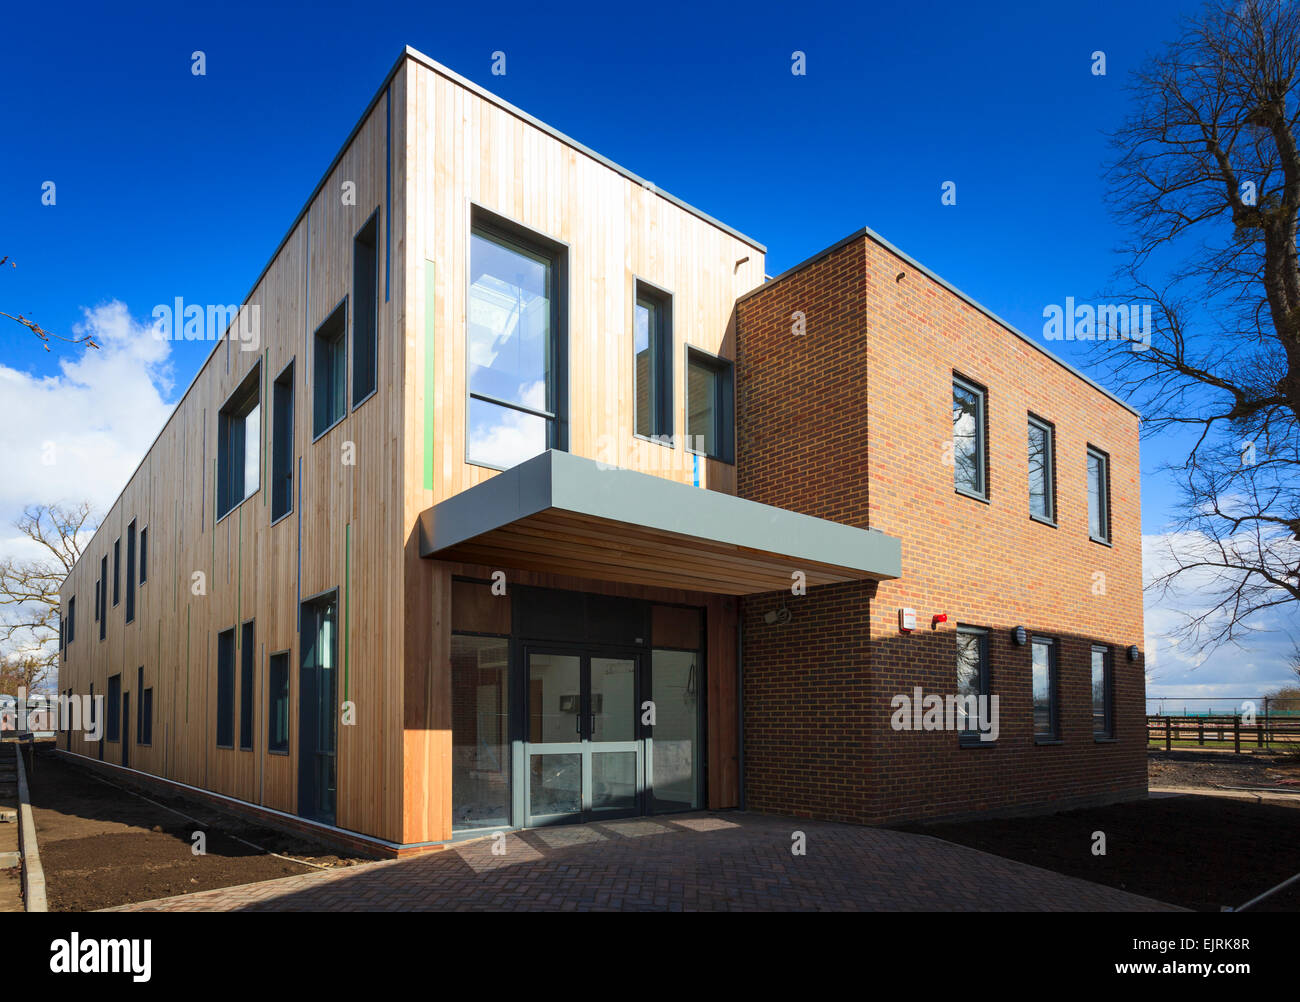 Modern timber clad college building Stock Photo